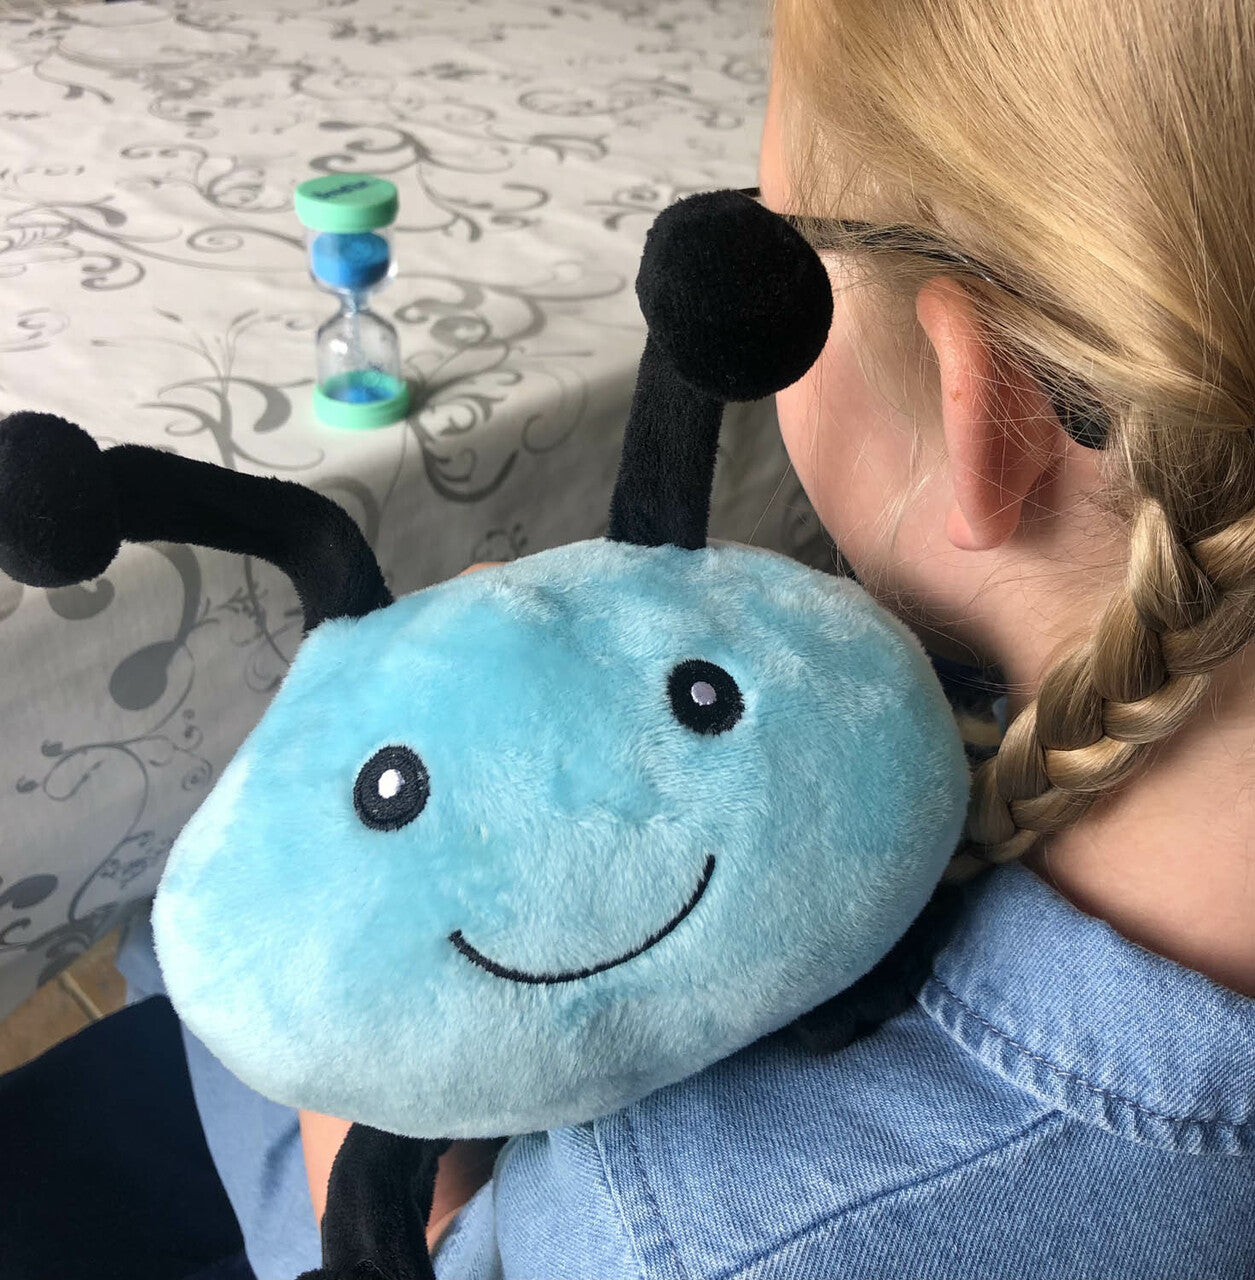 Tipperary Crystal The Irish Fairy Door - Calming Caterpillar  Weighted Soft Toy and Timer to Help Children to Take Control of Their Big Overwhelming Emotions.